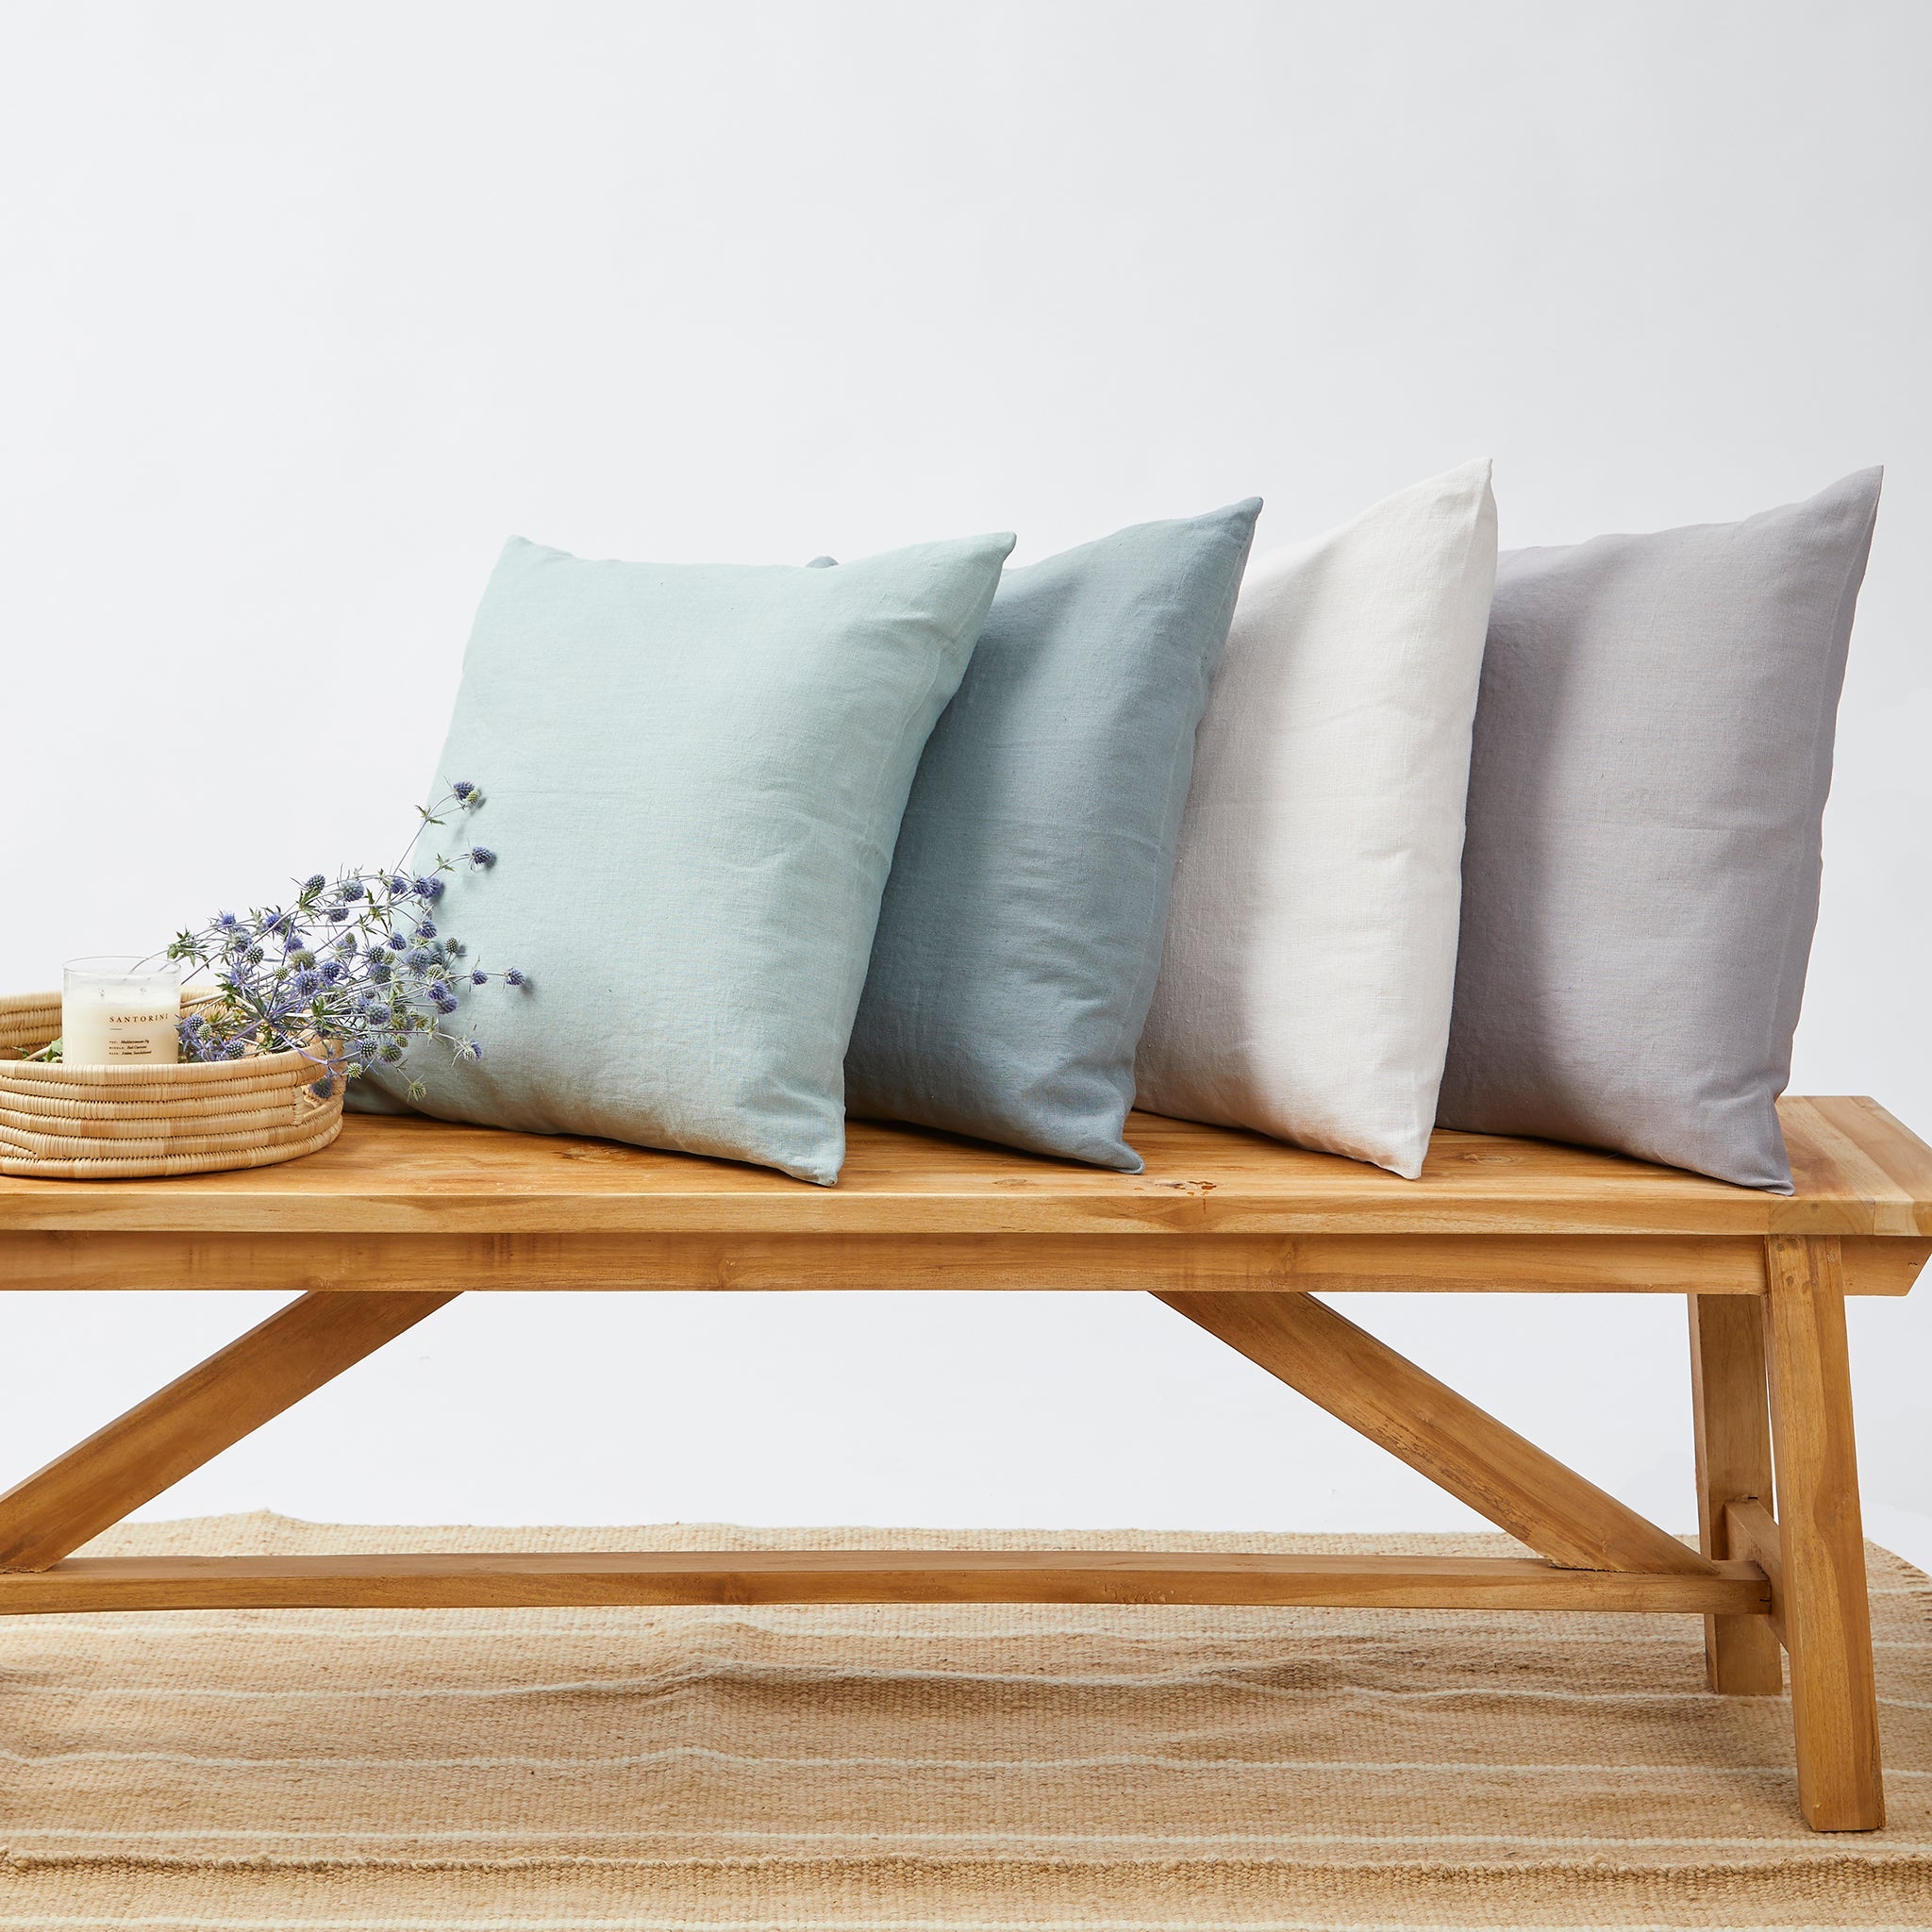 Ambience photos with linen pillows in cool natural tones